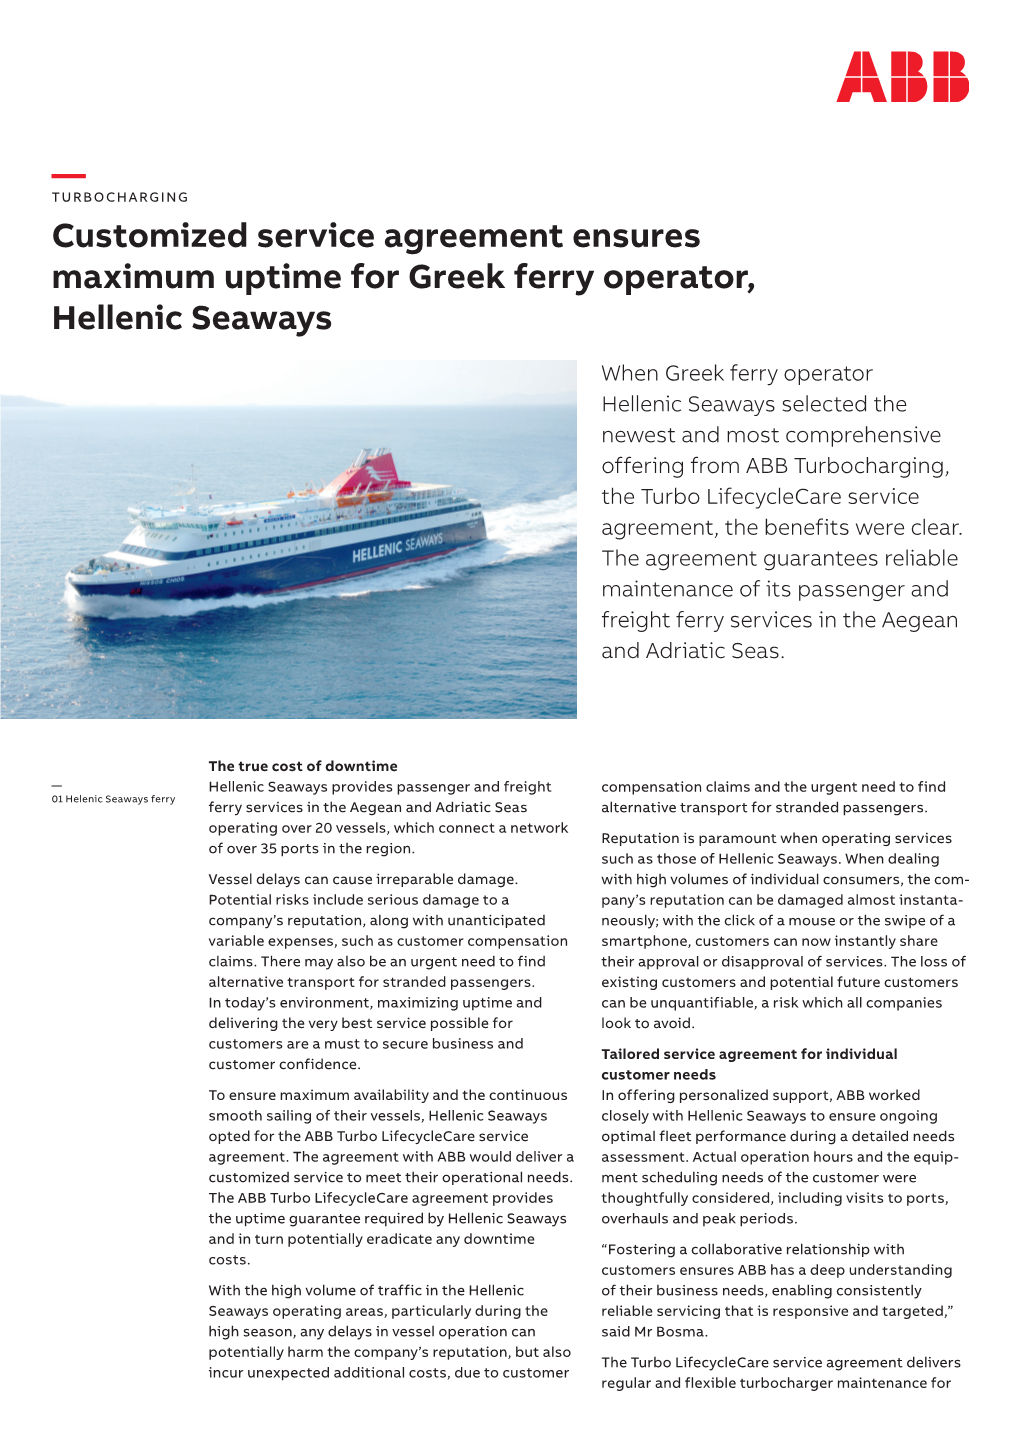 — Customized Service Agreement Ensures Maximum Uptime for Greek